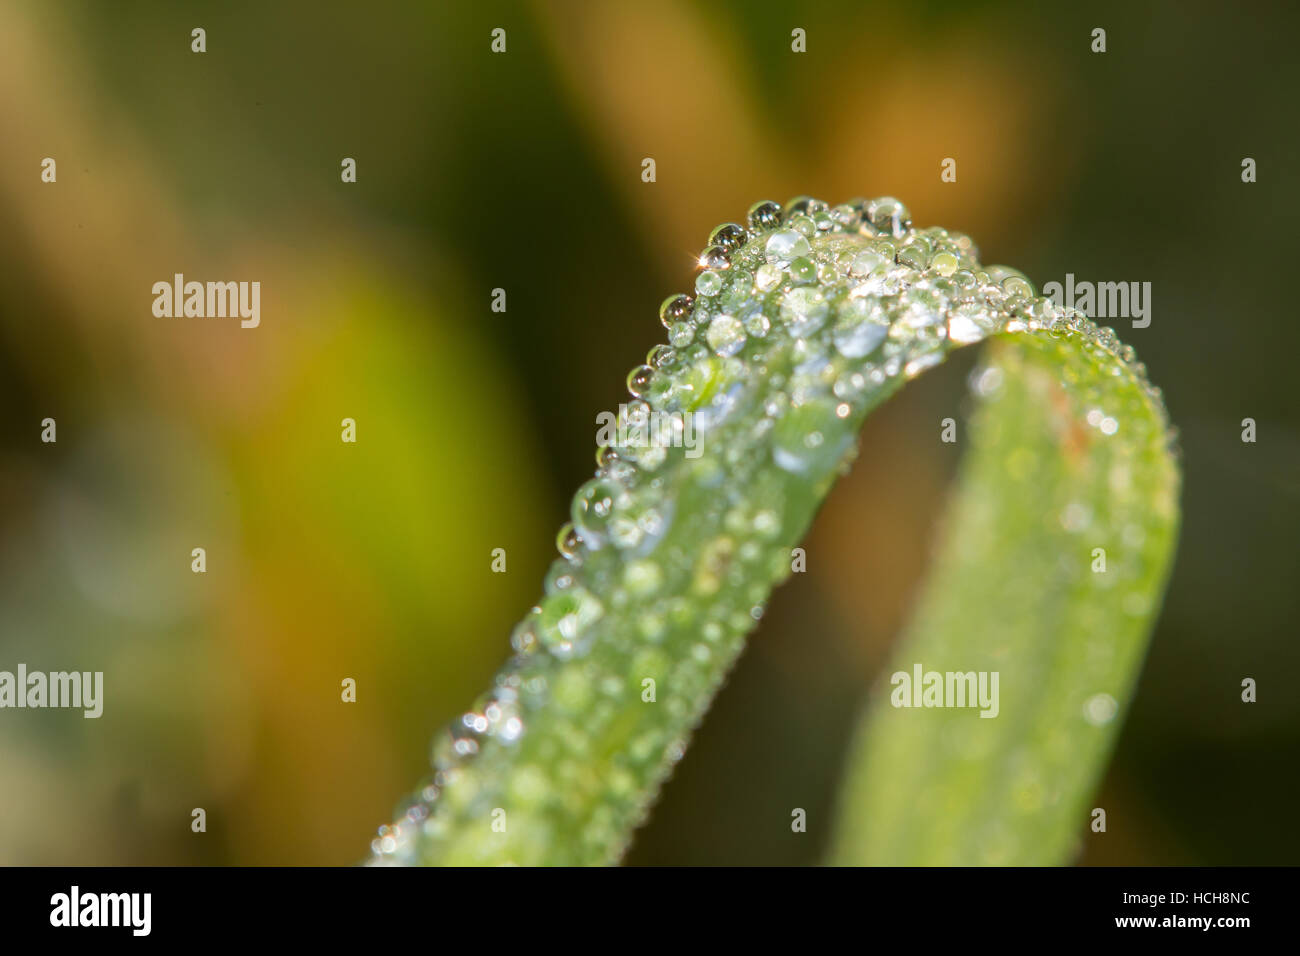 Blade of grass bent over with a lot of beads of dew on it Stock Photo